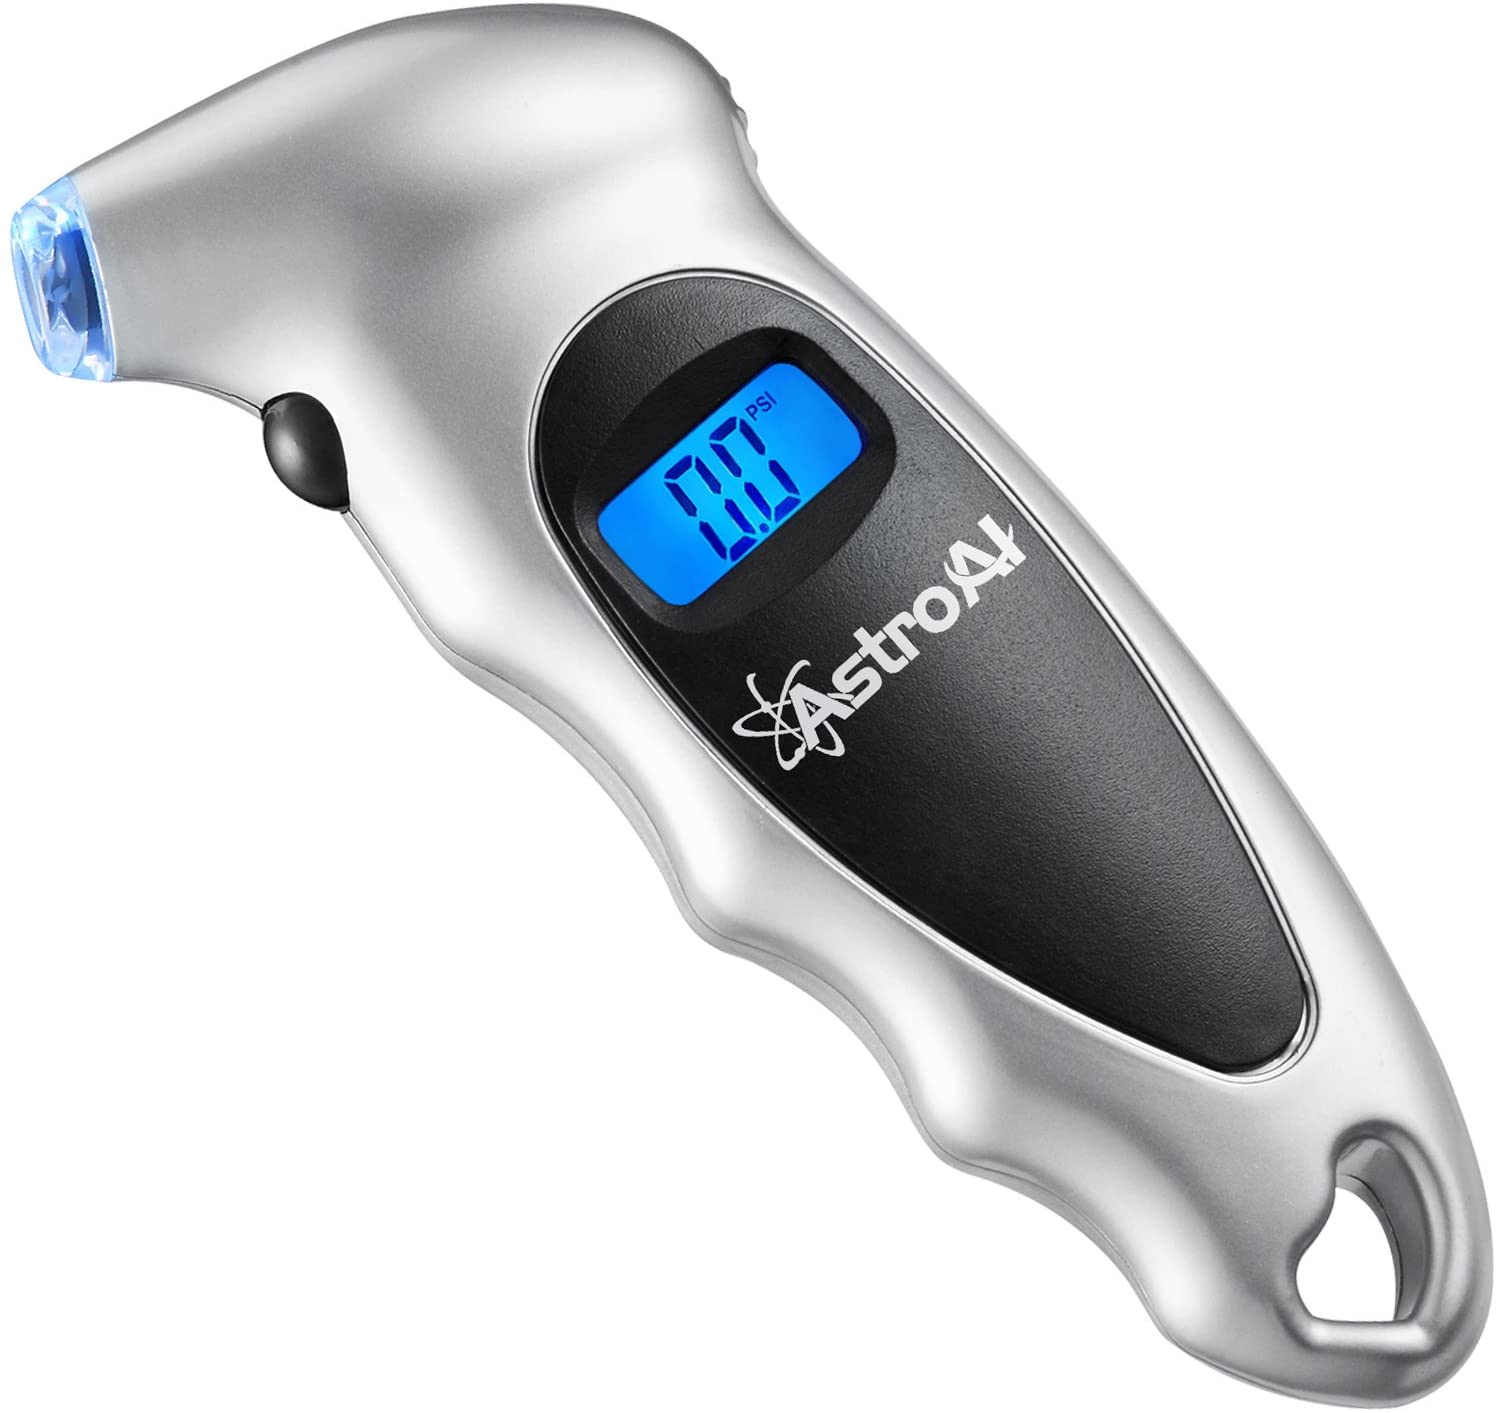 

Digital Tire Pressure Gauge 150 PSI 4 Settings for Car Truck Bicycle with Backlit LCD and Non-Slip Grip, Silver (1 Pack)